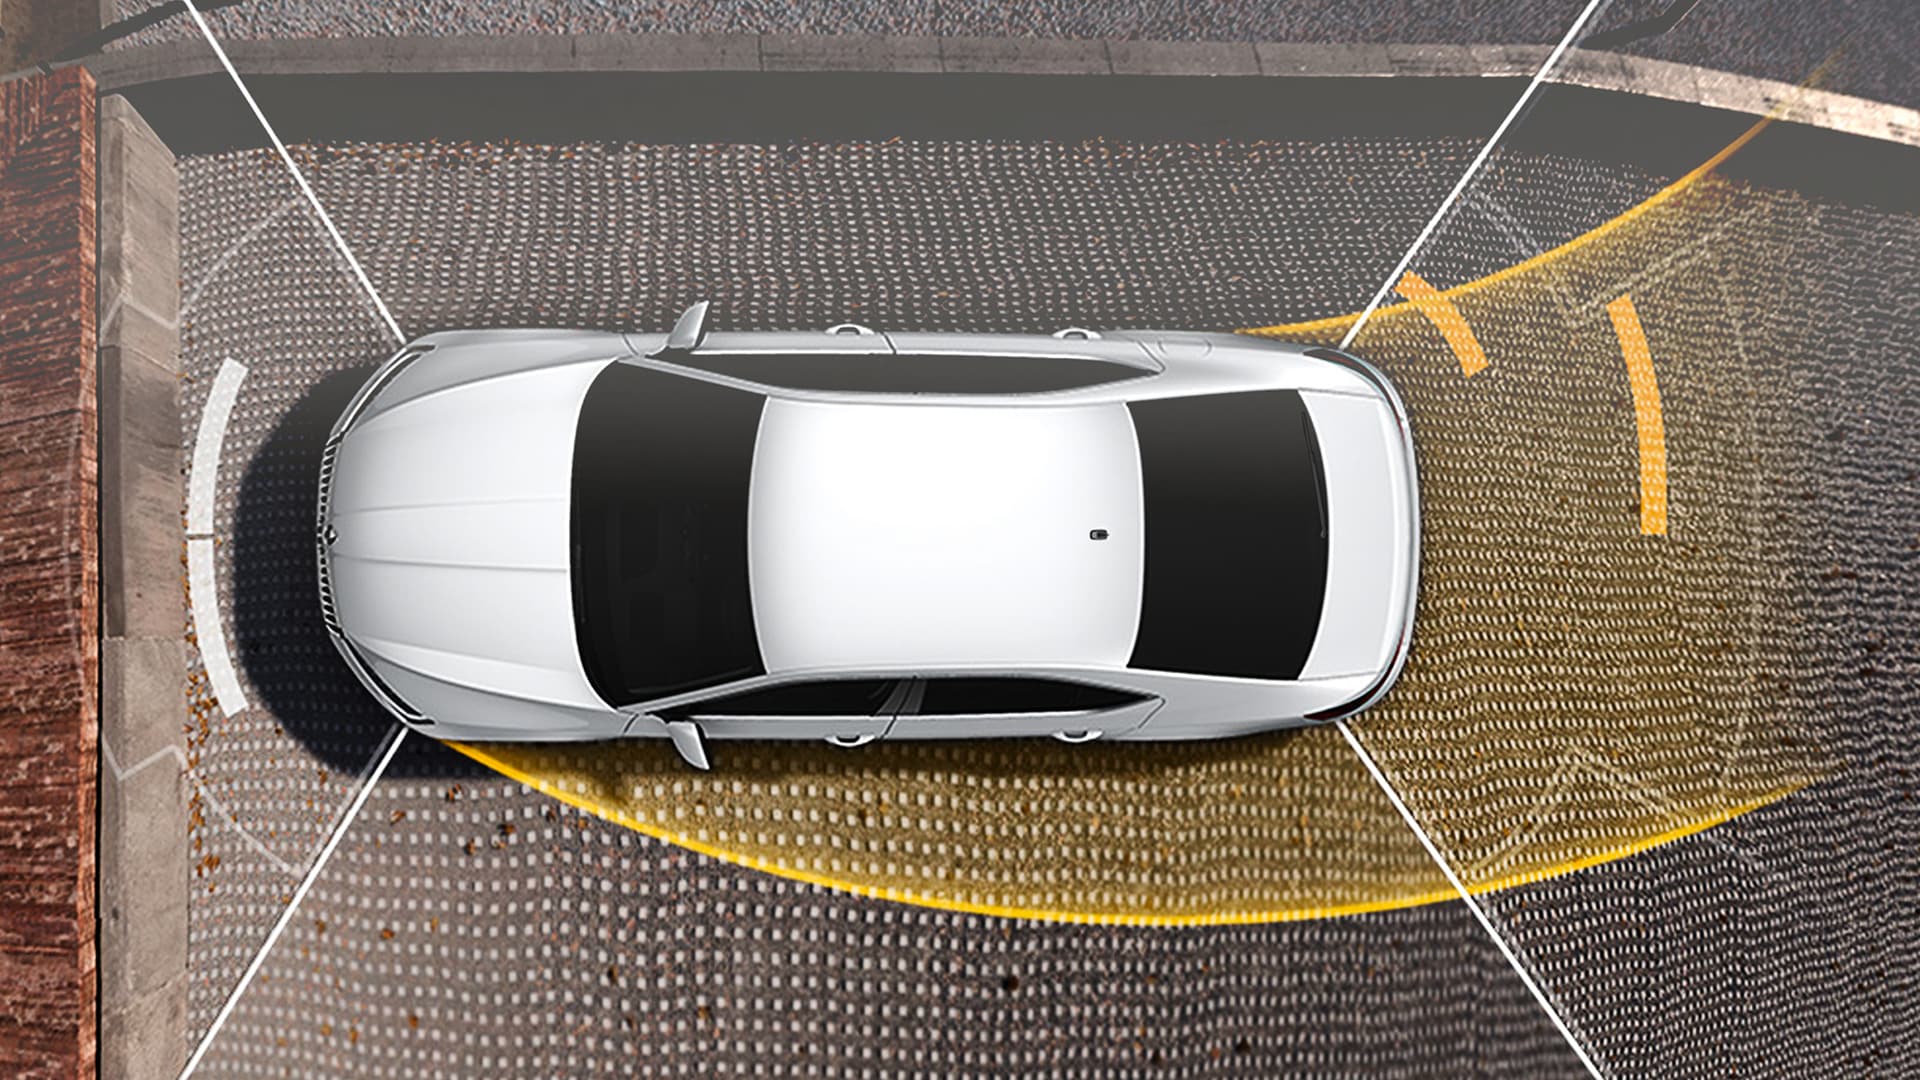 Park Assist and 360-degree camera helps Skoda Superb automatically identify appropriate parking space among parallel or perpendicular vehicles. 